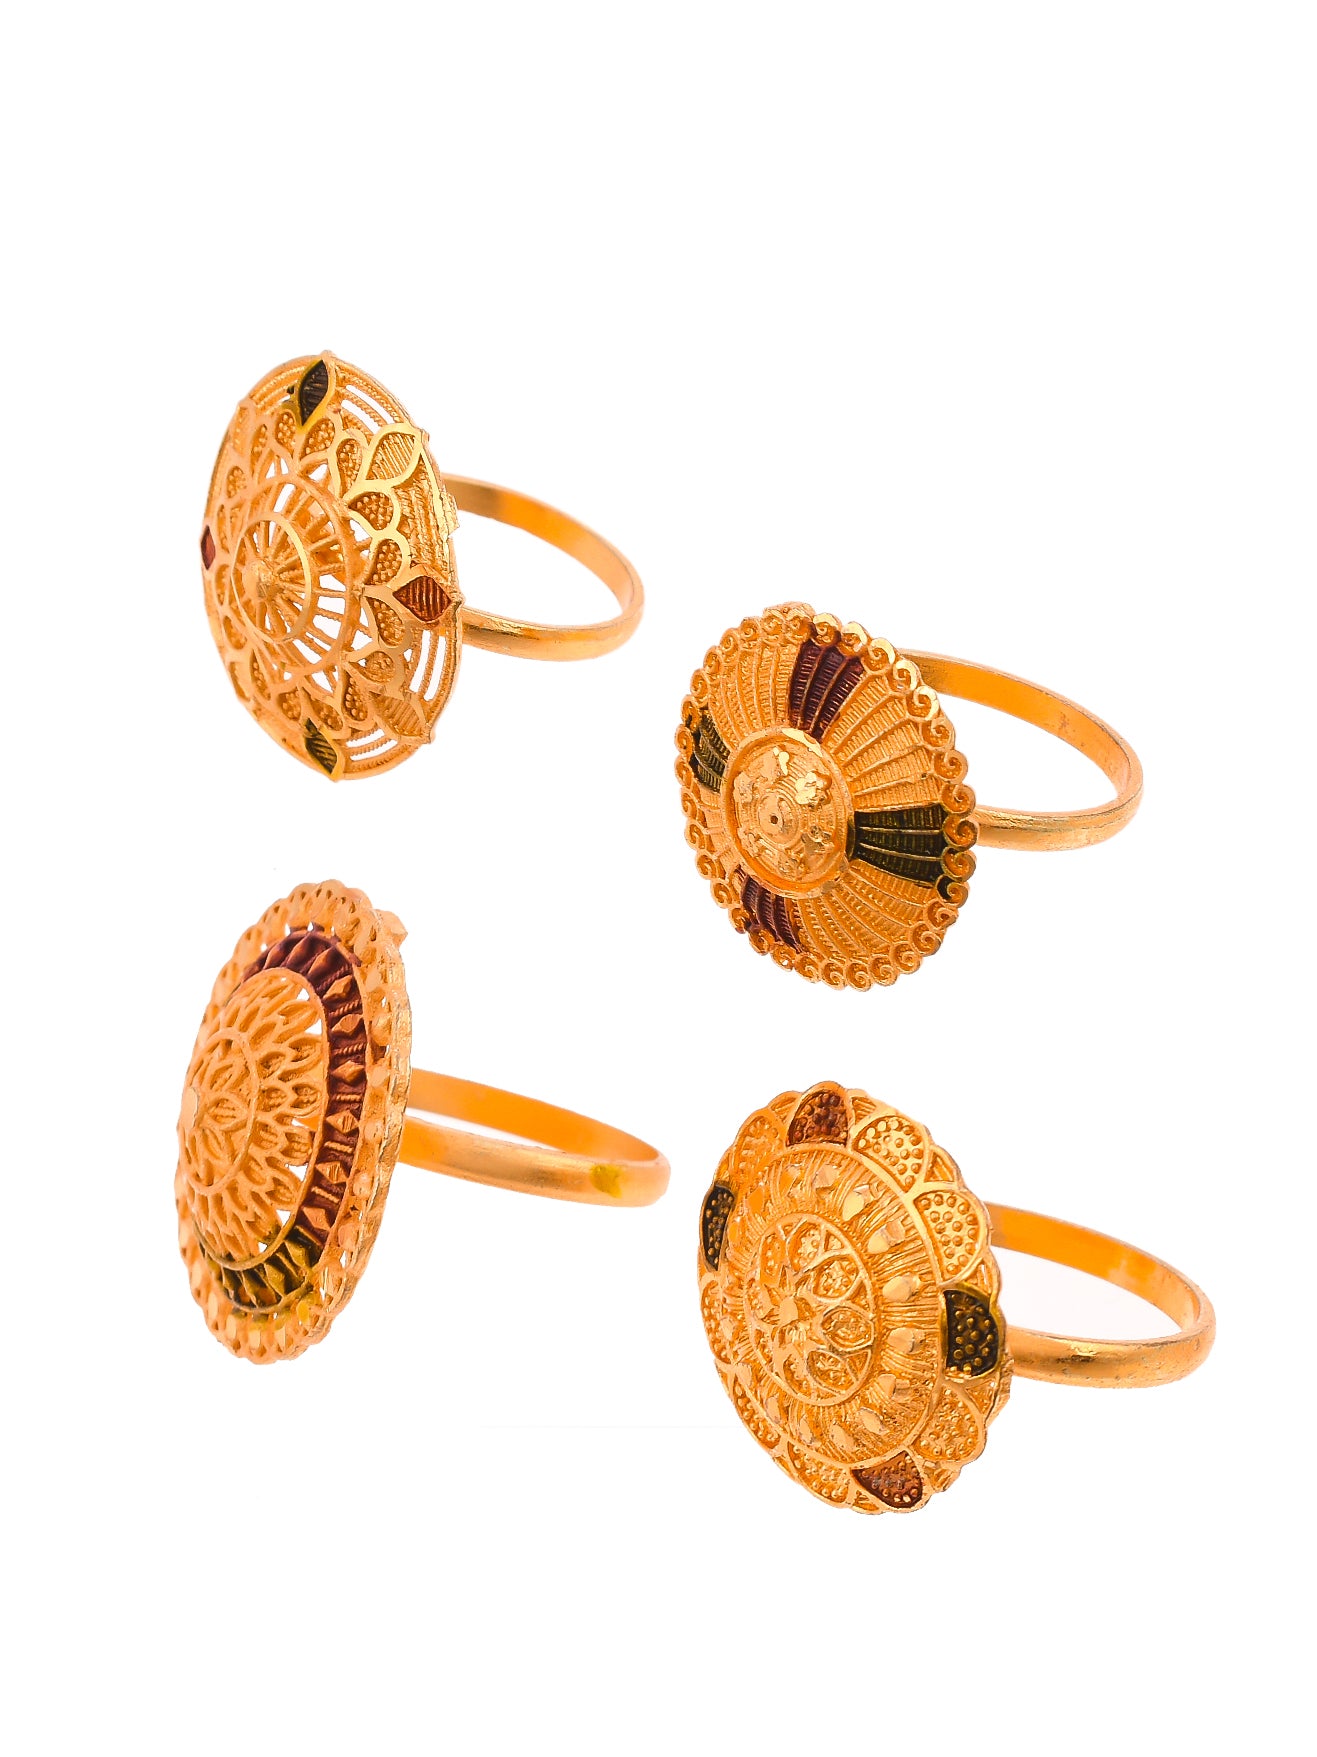 Set of 4 Gold Plated Handcrafted Floral Ring for Women